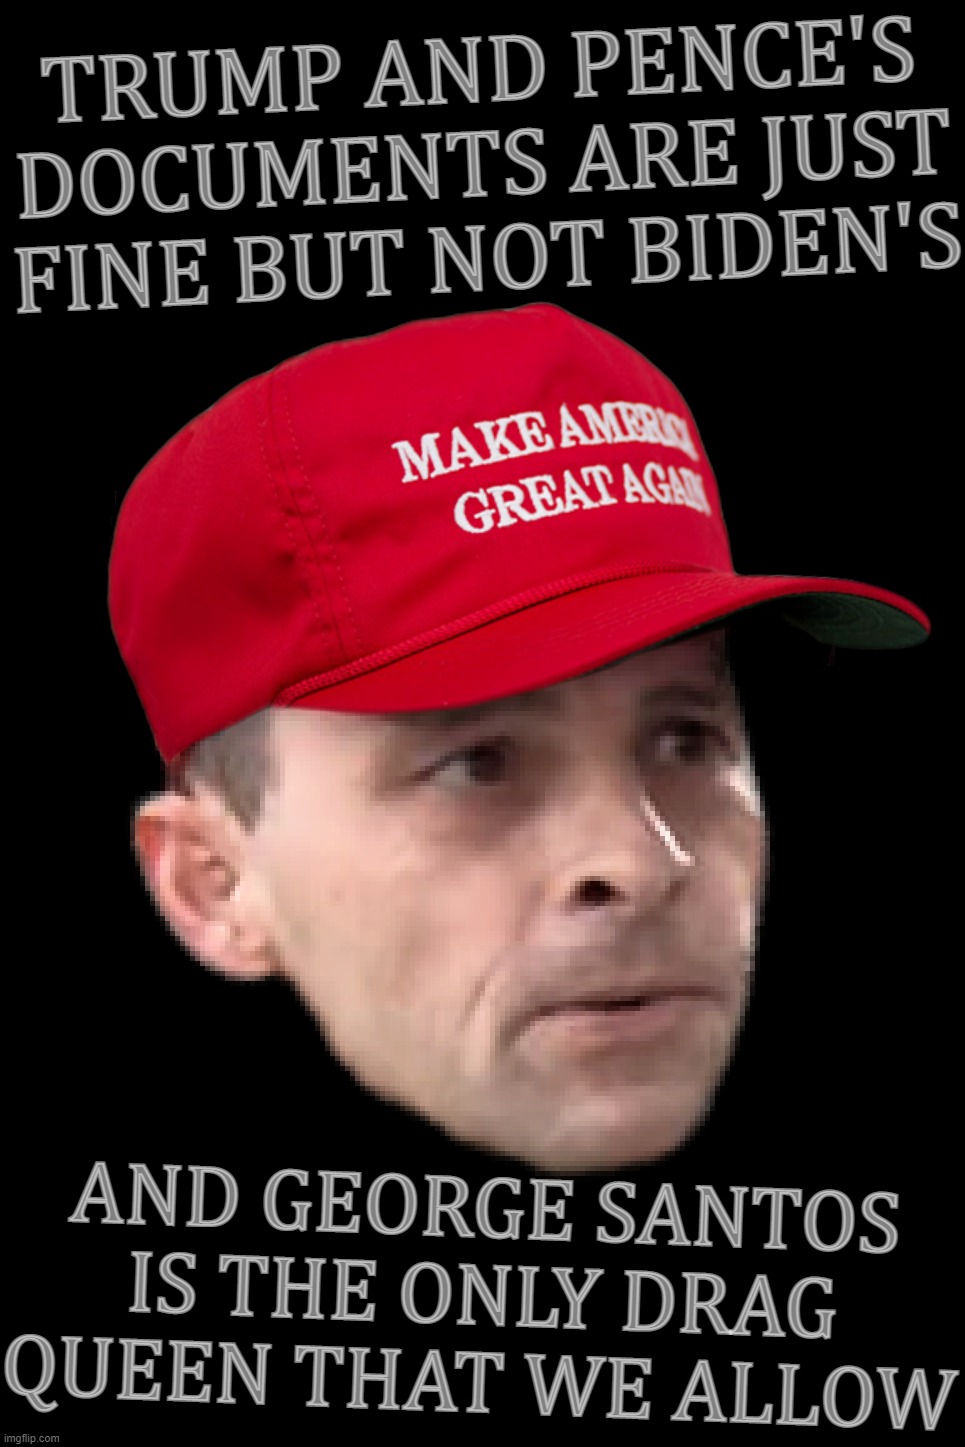 MAGA moron... | TRUMP AND PENCE'S DOCUMENTS ARE JUST FINE BUT NOT BIDEN'S; AND GEORGE SANTOS IS THE ONLY DRAG QUEEN THAT WE ALLOW | image tagged in maga,scumbag hat,moron,gop hypocrite,double standard,bullshit meter | made w/ Imgflip meme maker